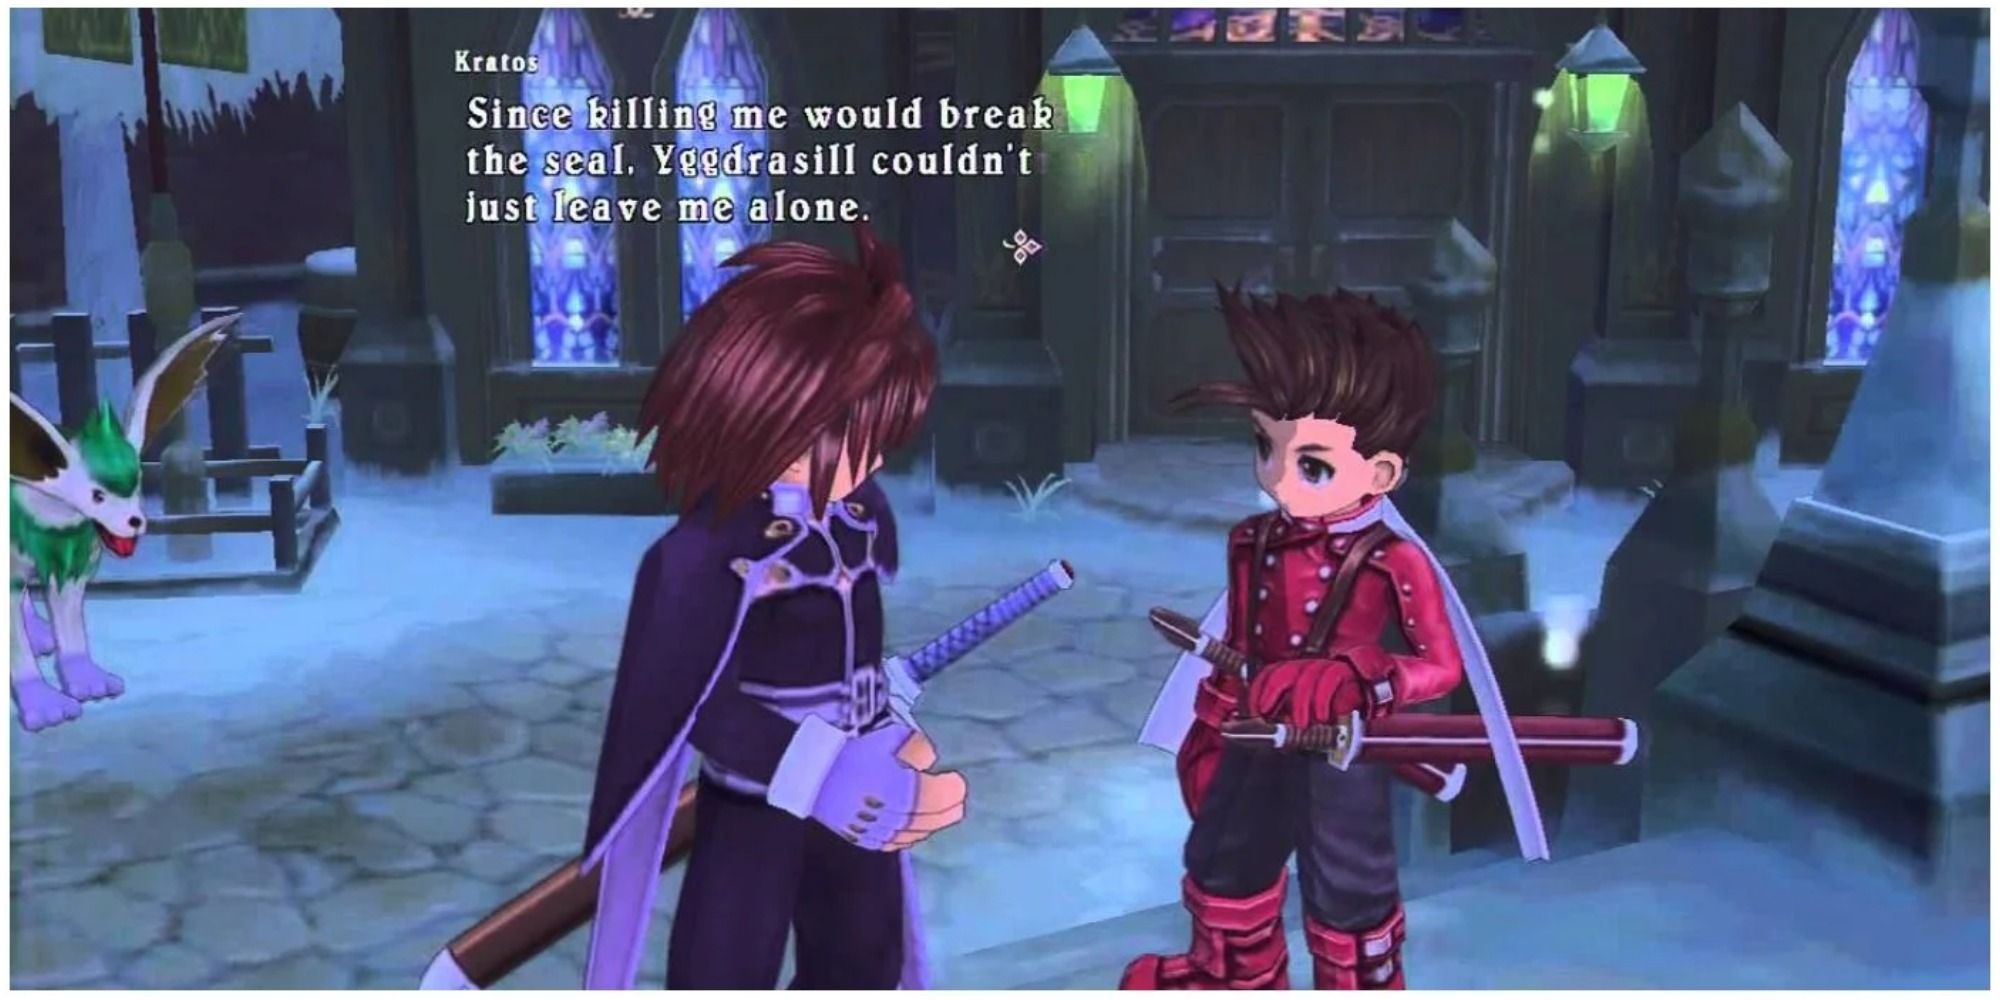 Lloyd and Kratos discuss important matters in Tales of Symphonia